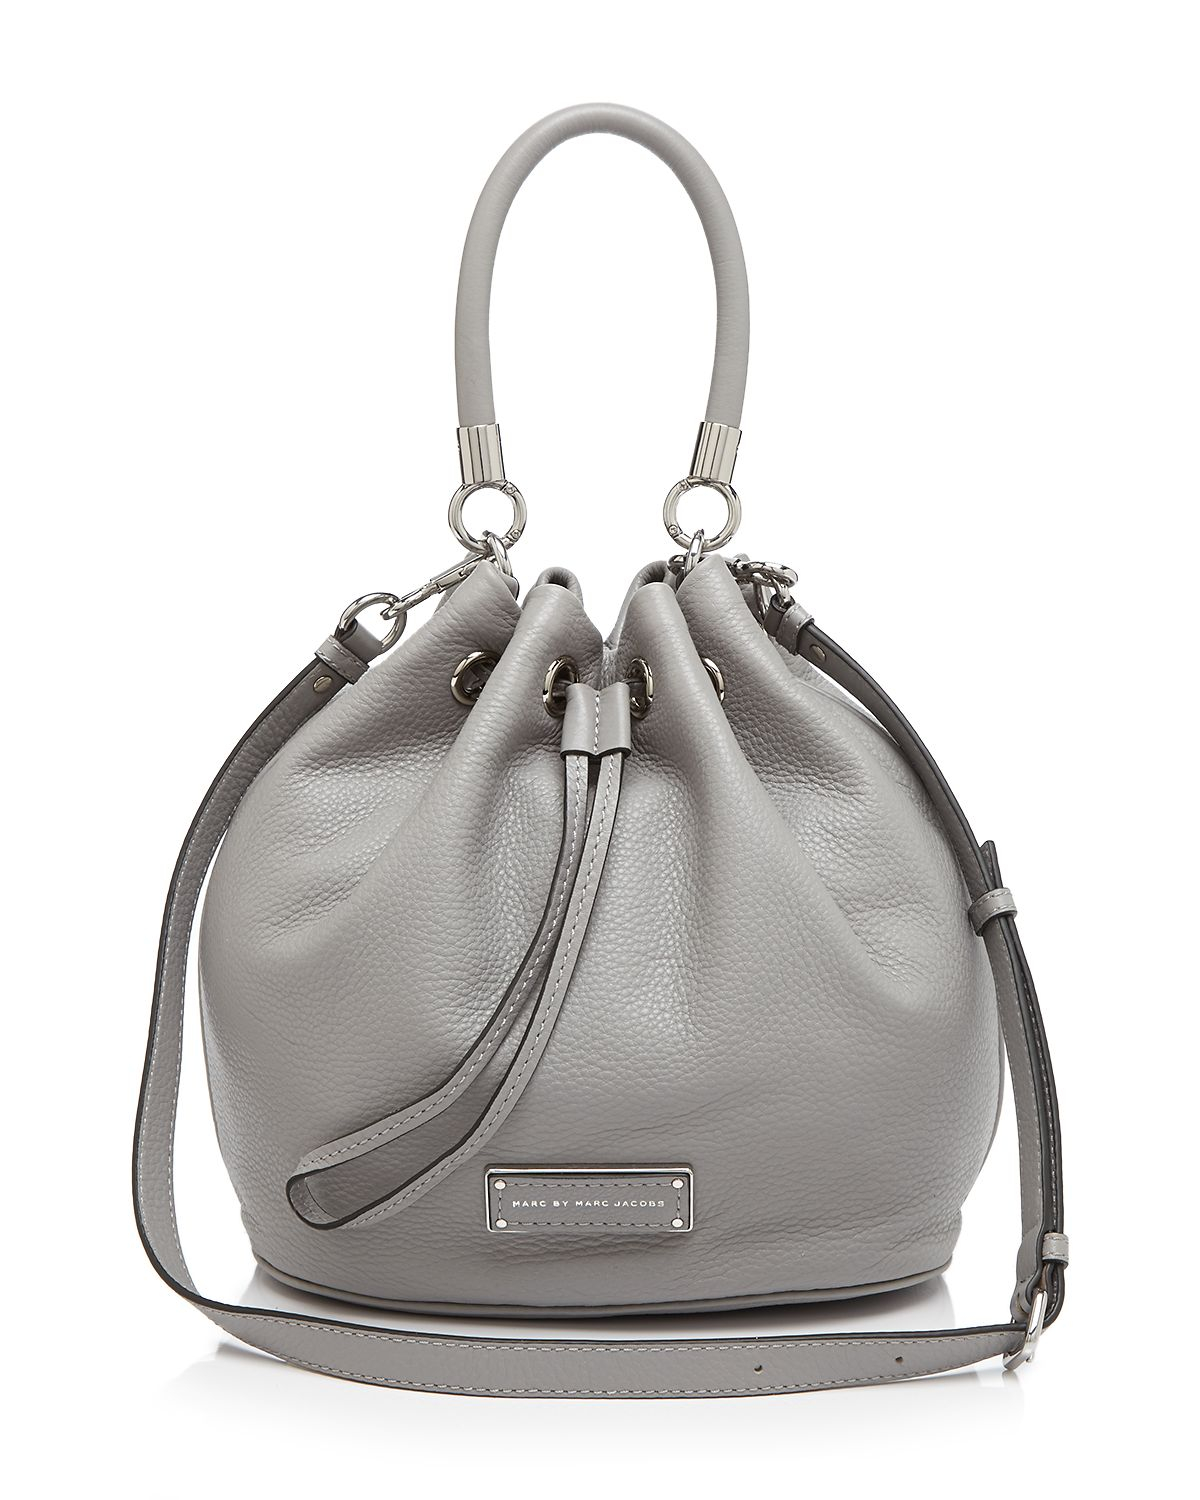 The Marc Jacobs Bucket Bags For Women :: Keweenaw Bay Indian Community